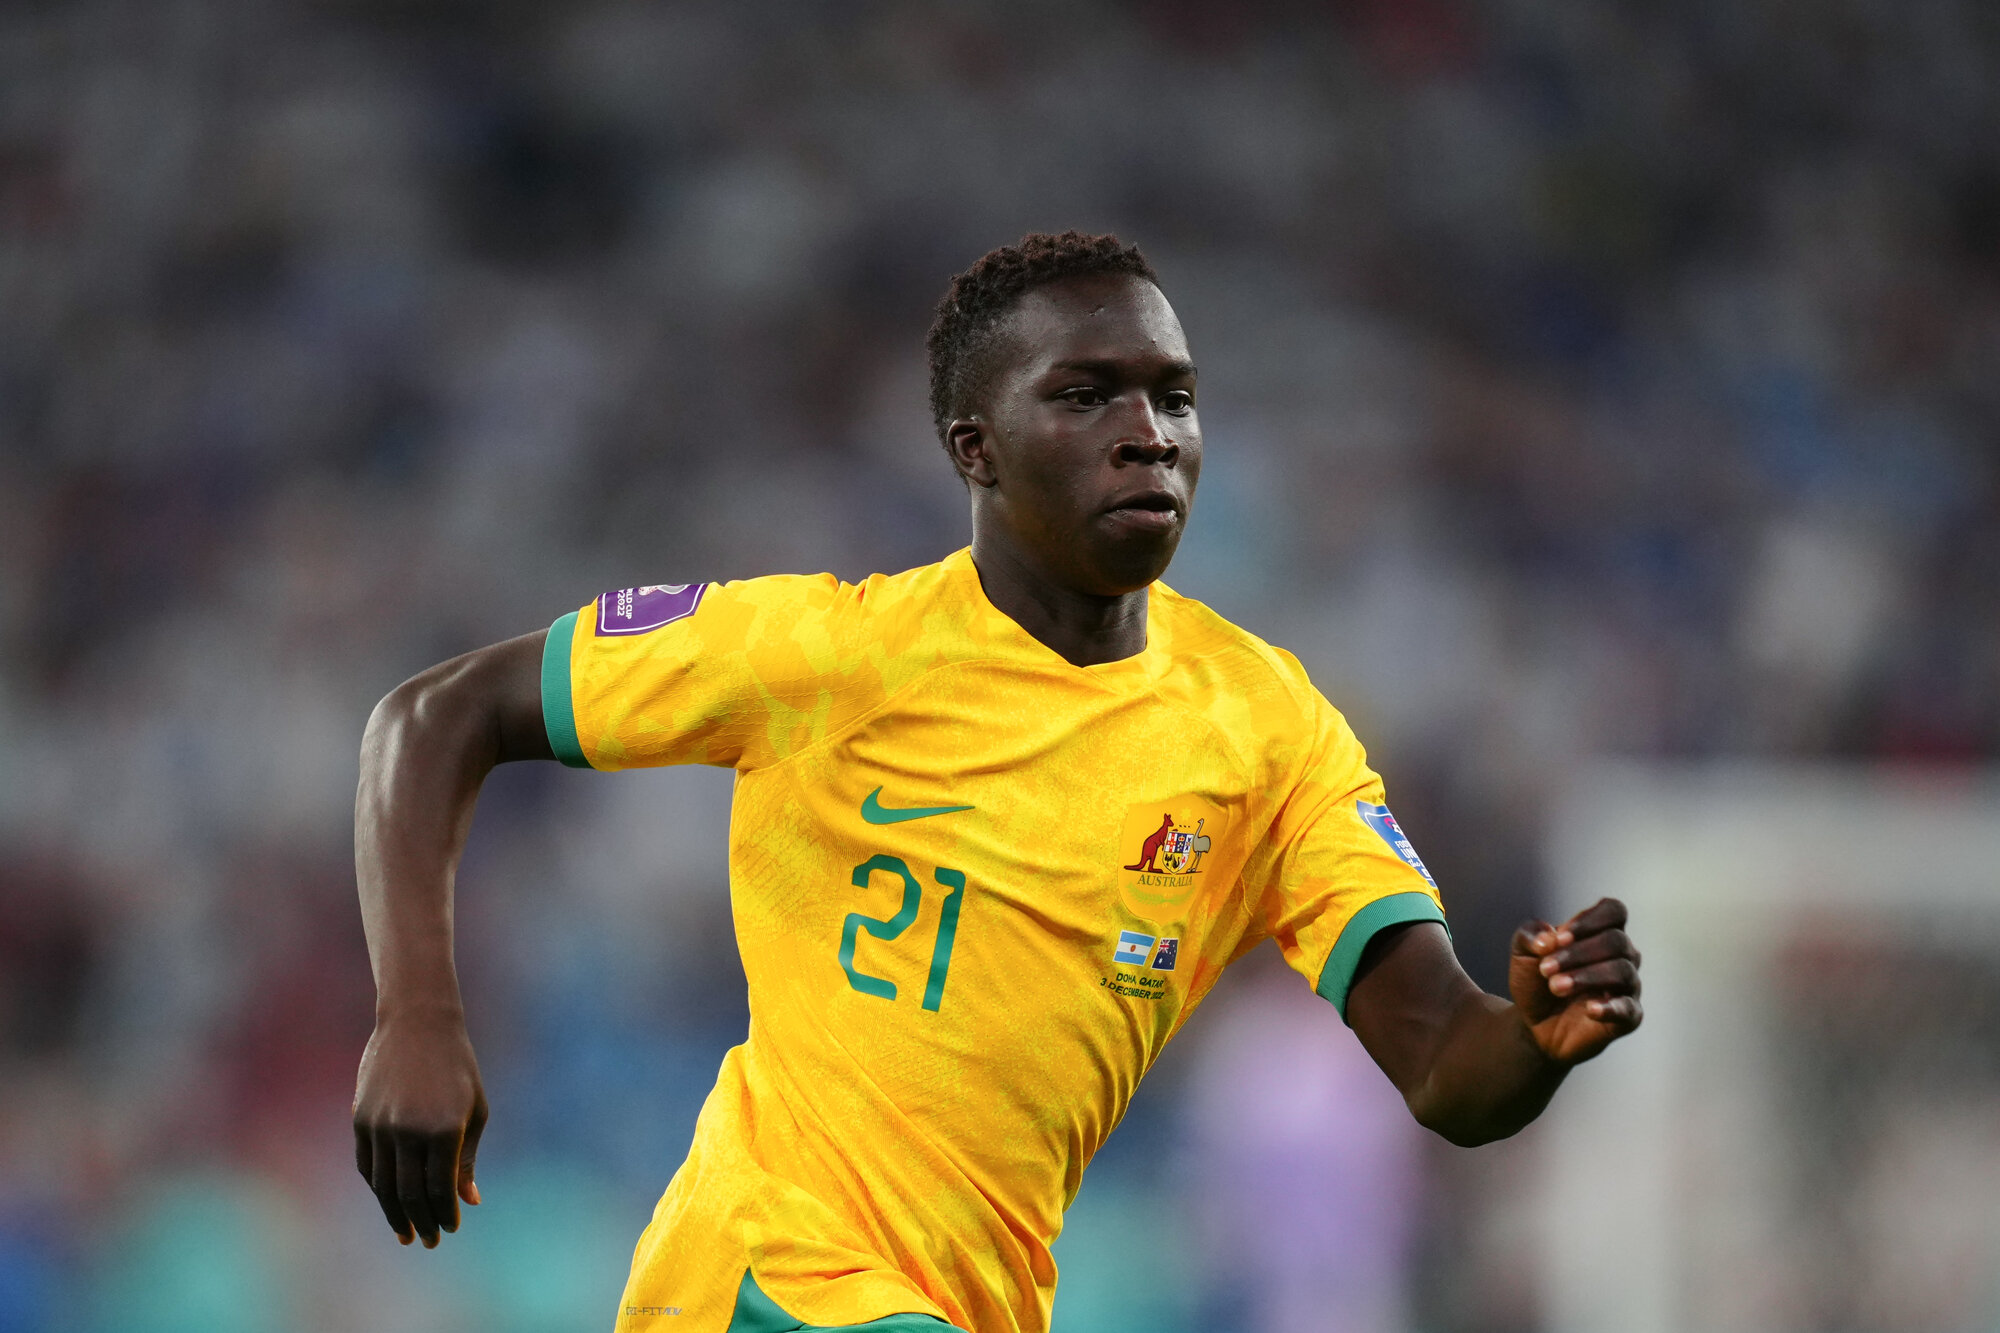 Newcastle Utd to finalize the signing of Garang Kuol as club set for debut this weekend